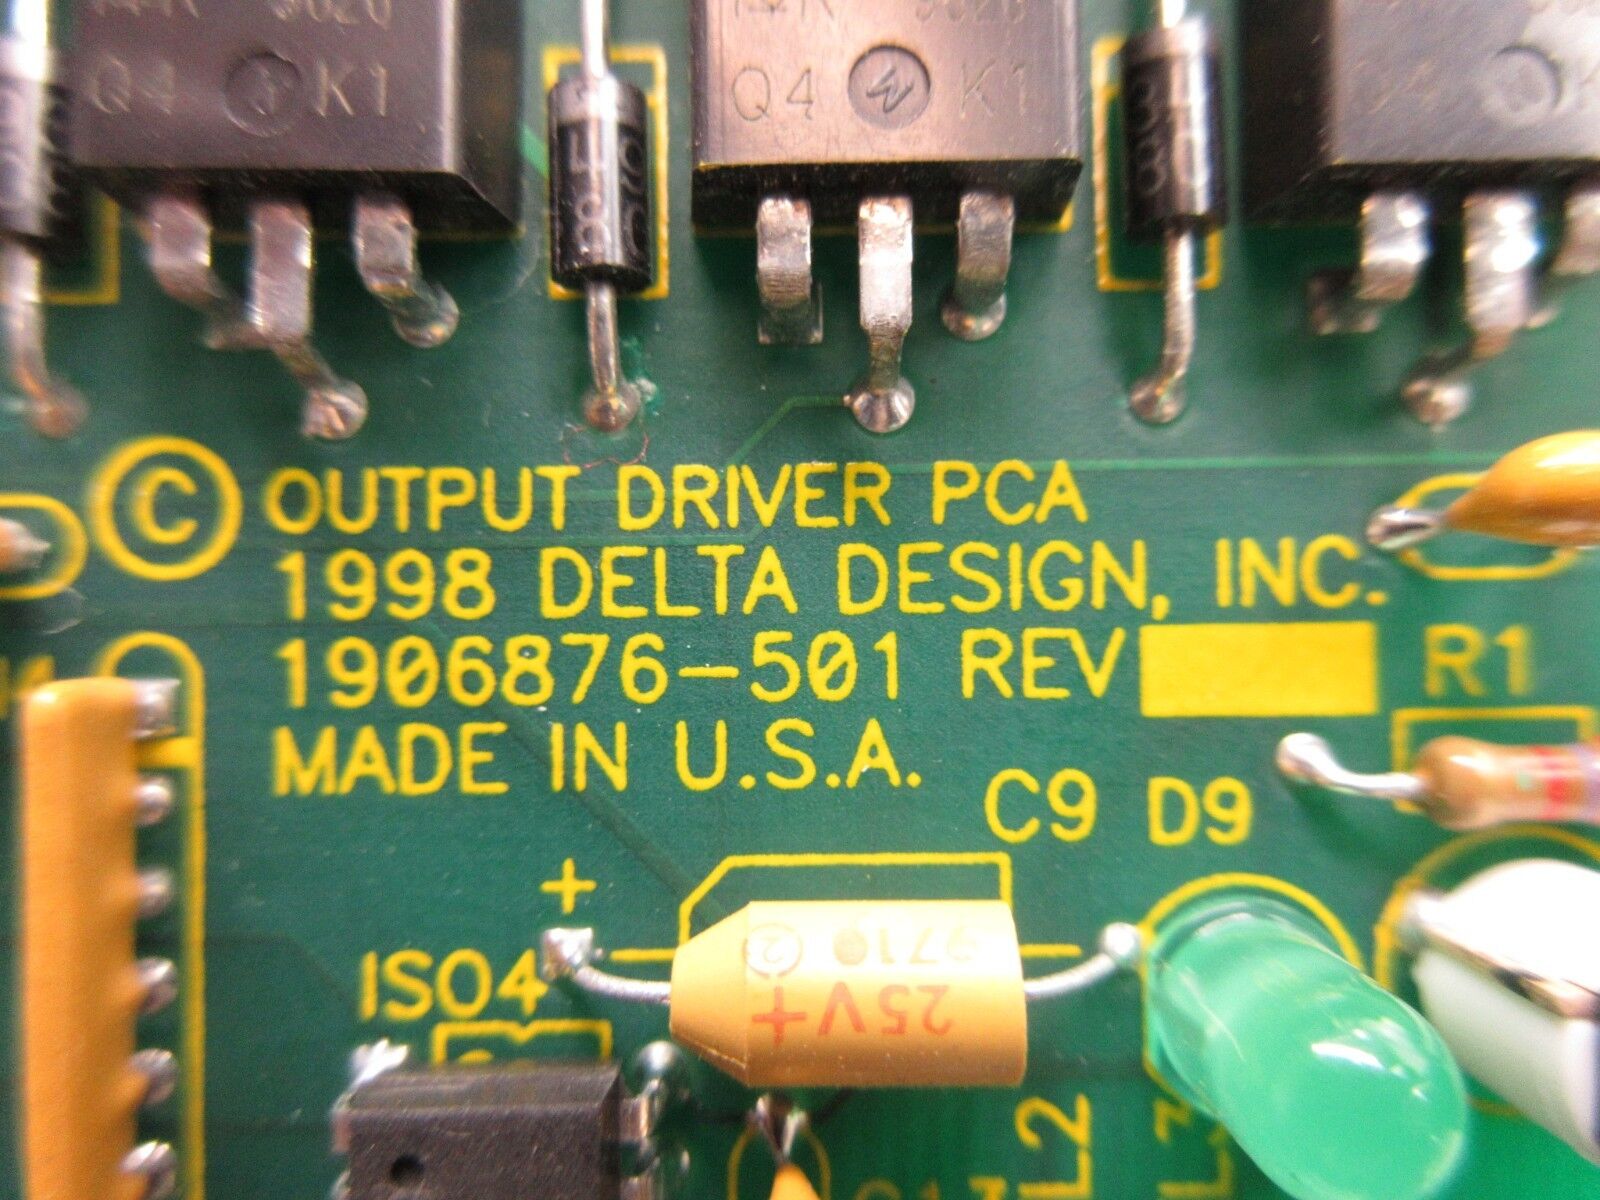 Delta Design 1906876-501 Output Driver PCA Board PCB Summit ATC Thermal Used